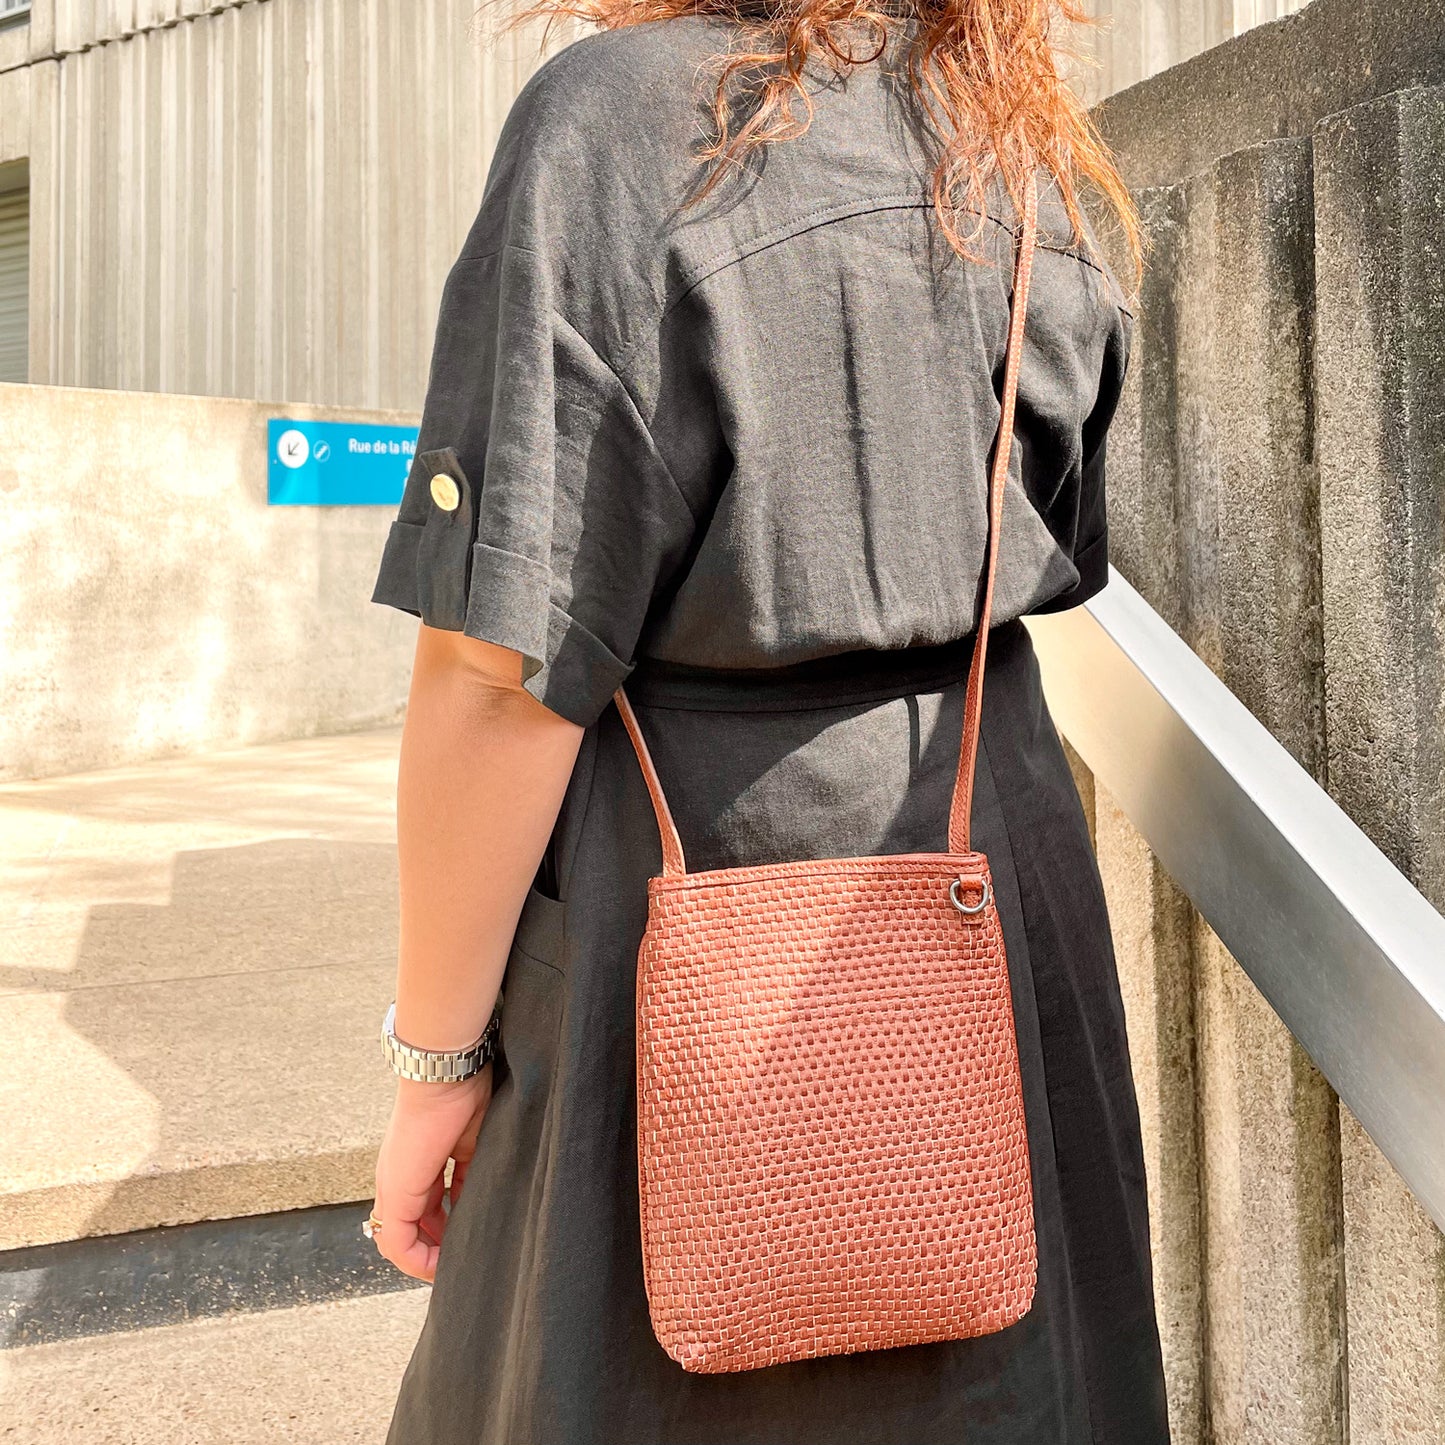 Belle Leather Crossbody in Brown